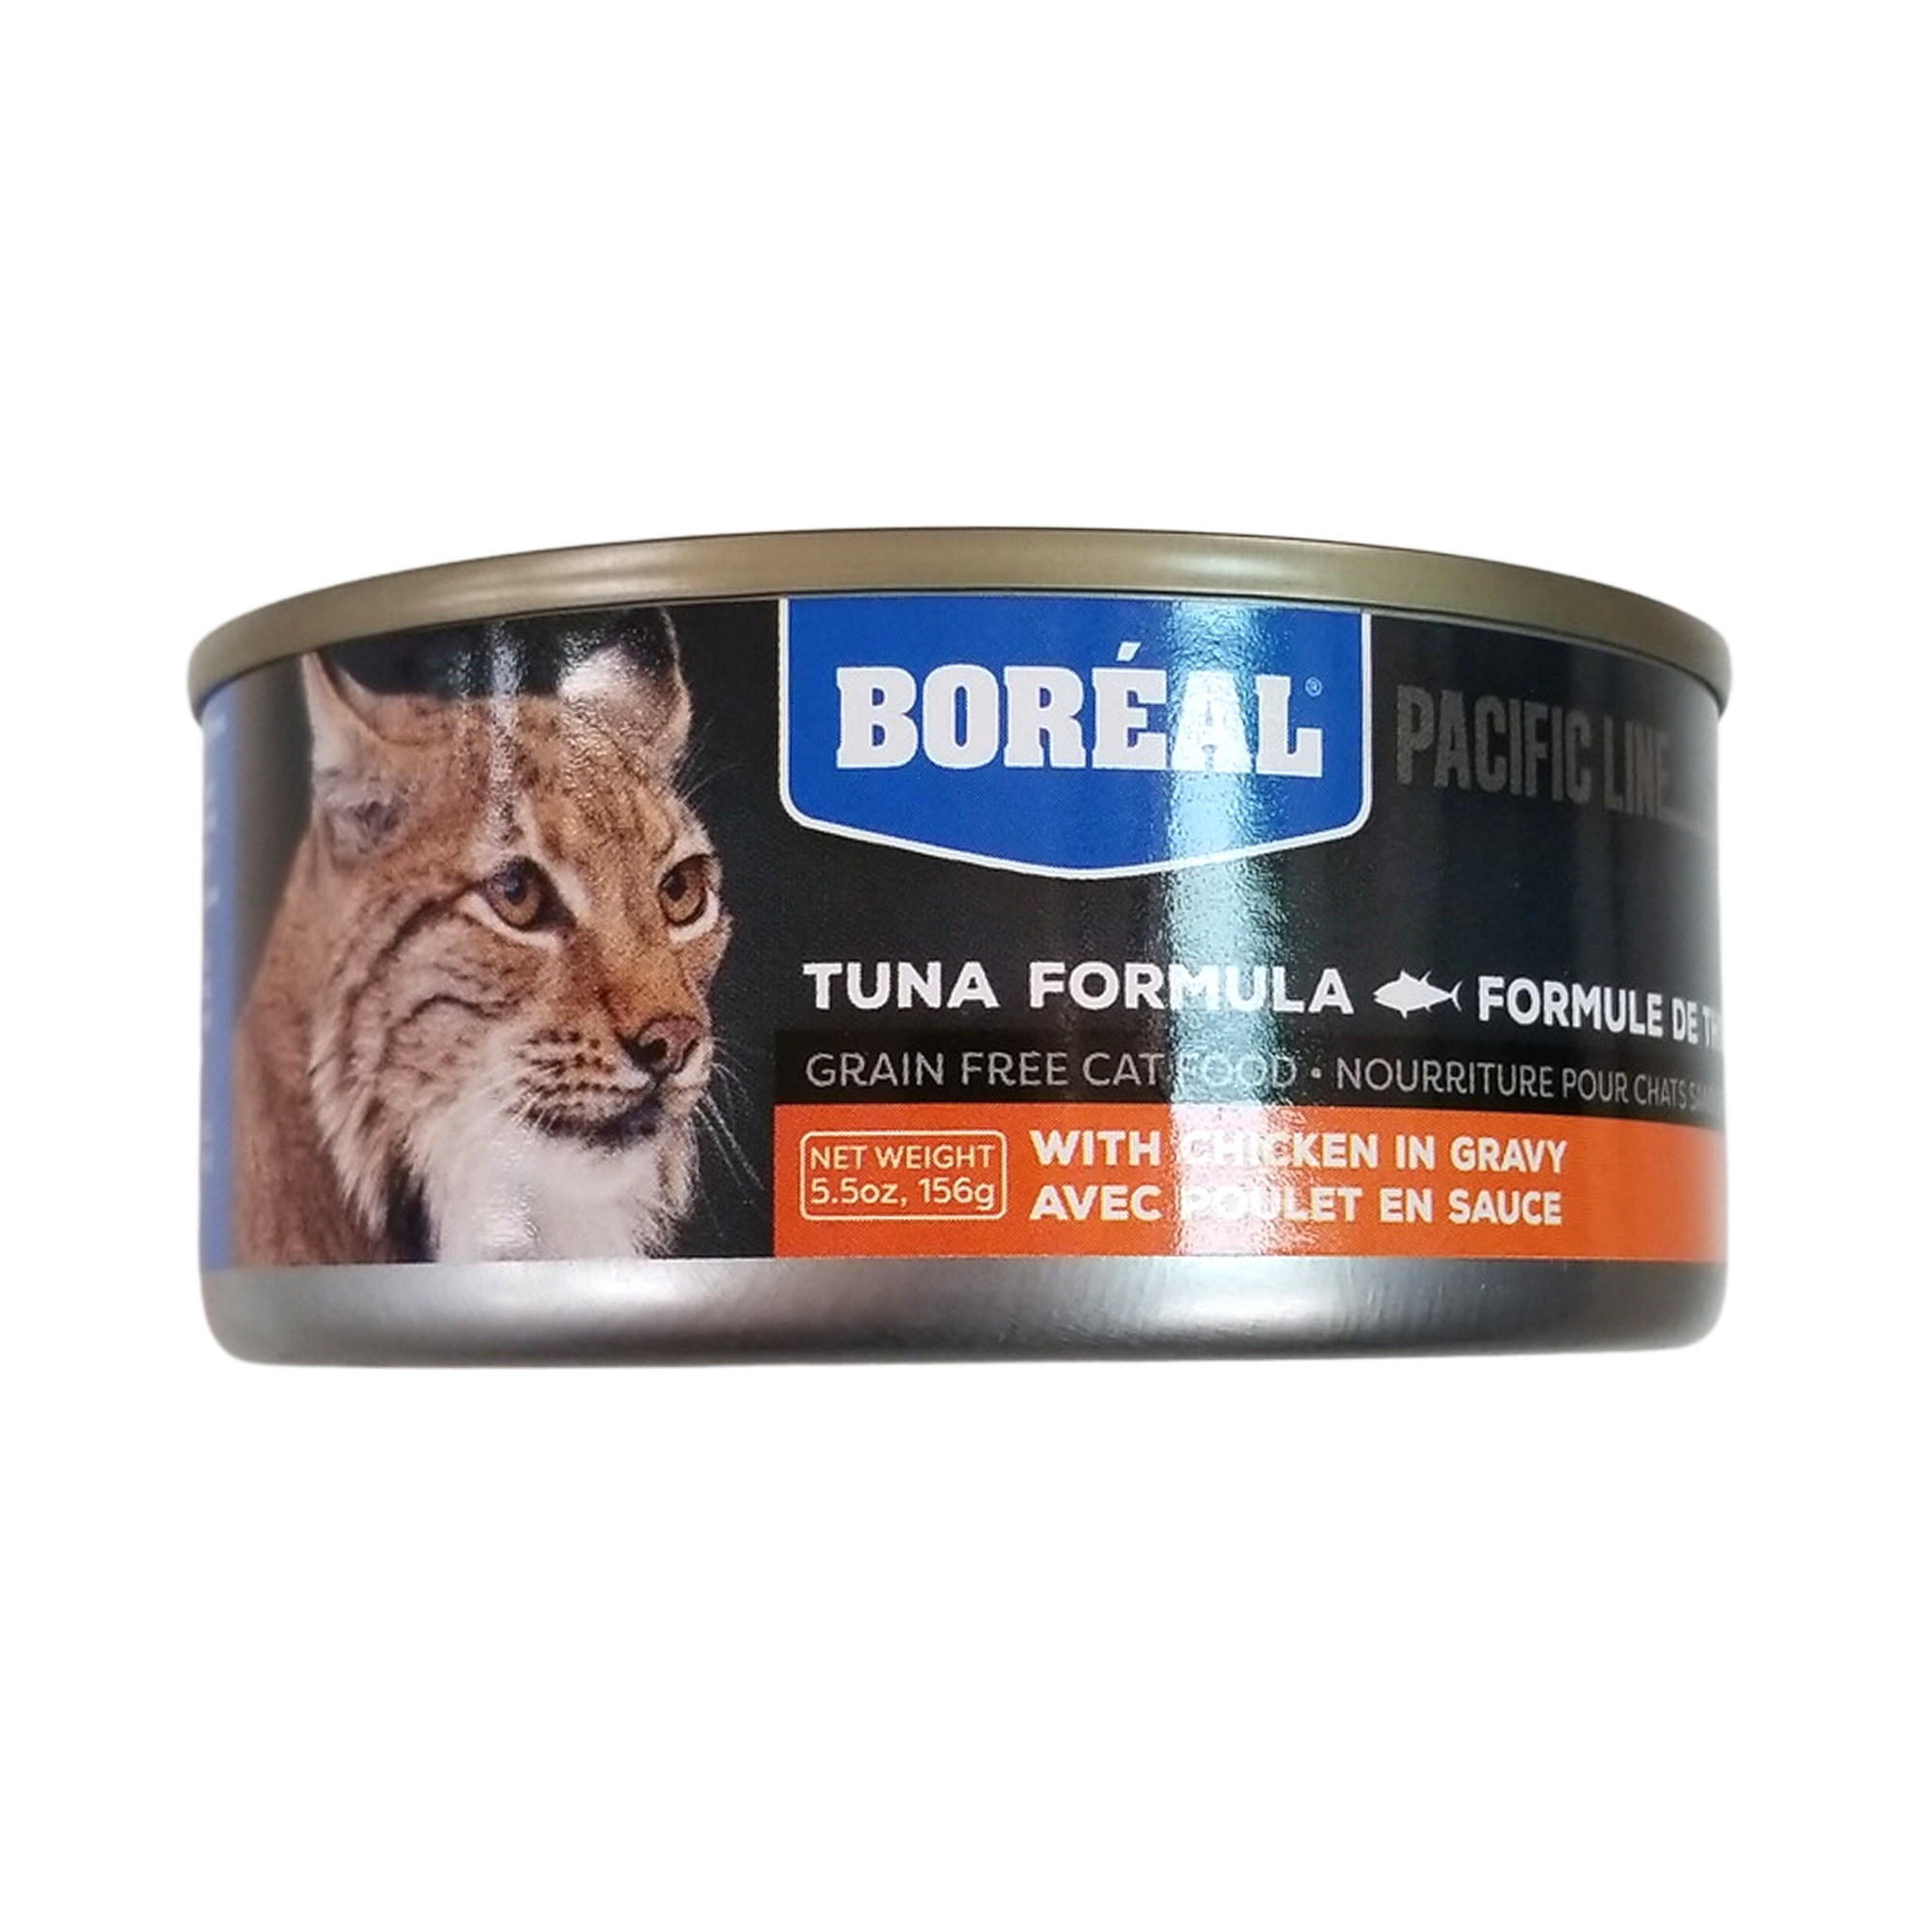 Boréal Functional Canned Cat Food, Grain-Free, Pacific Line Tuna Formula, Chicken In Gravy, 5.5oz